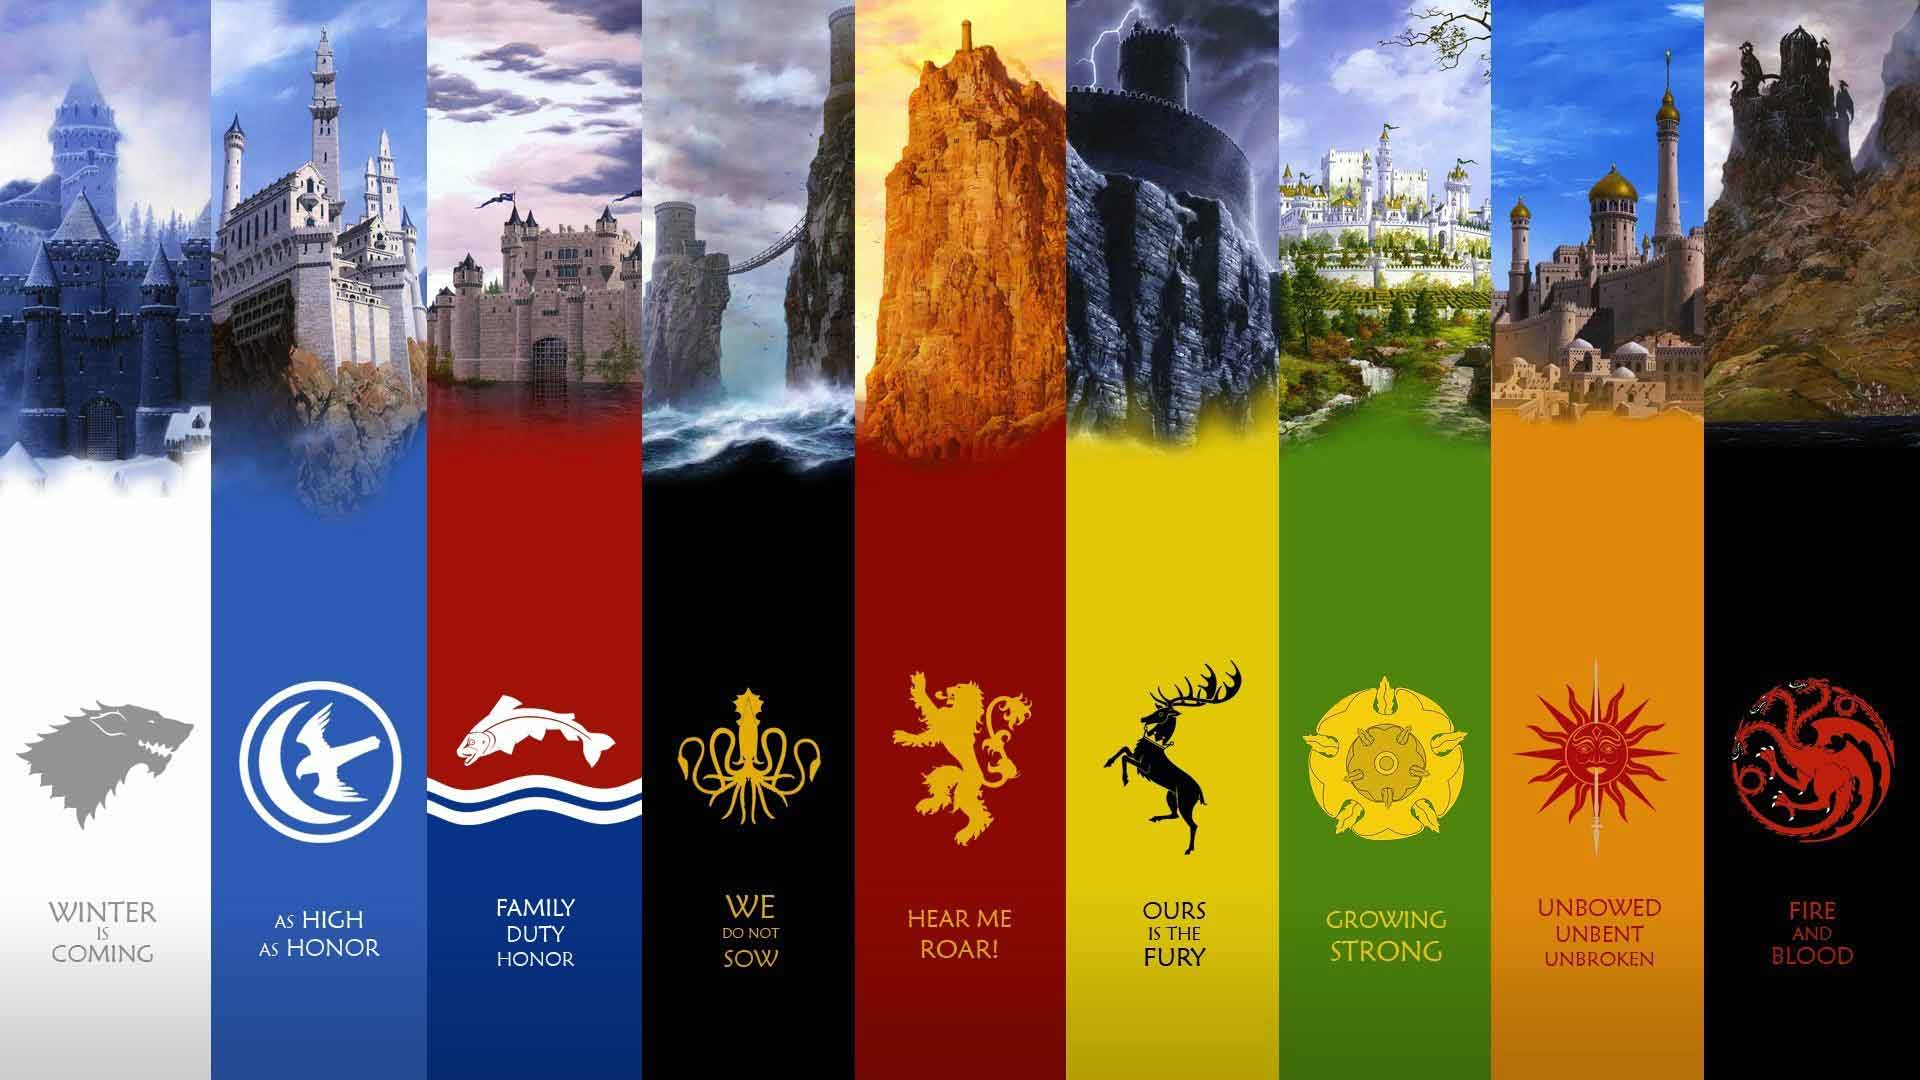 Which Game of Thrones House Do You Belong To?